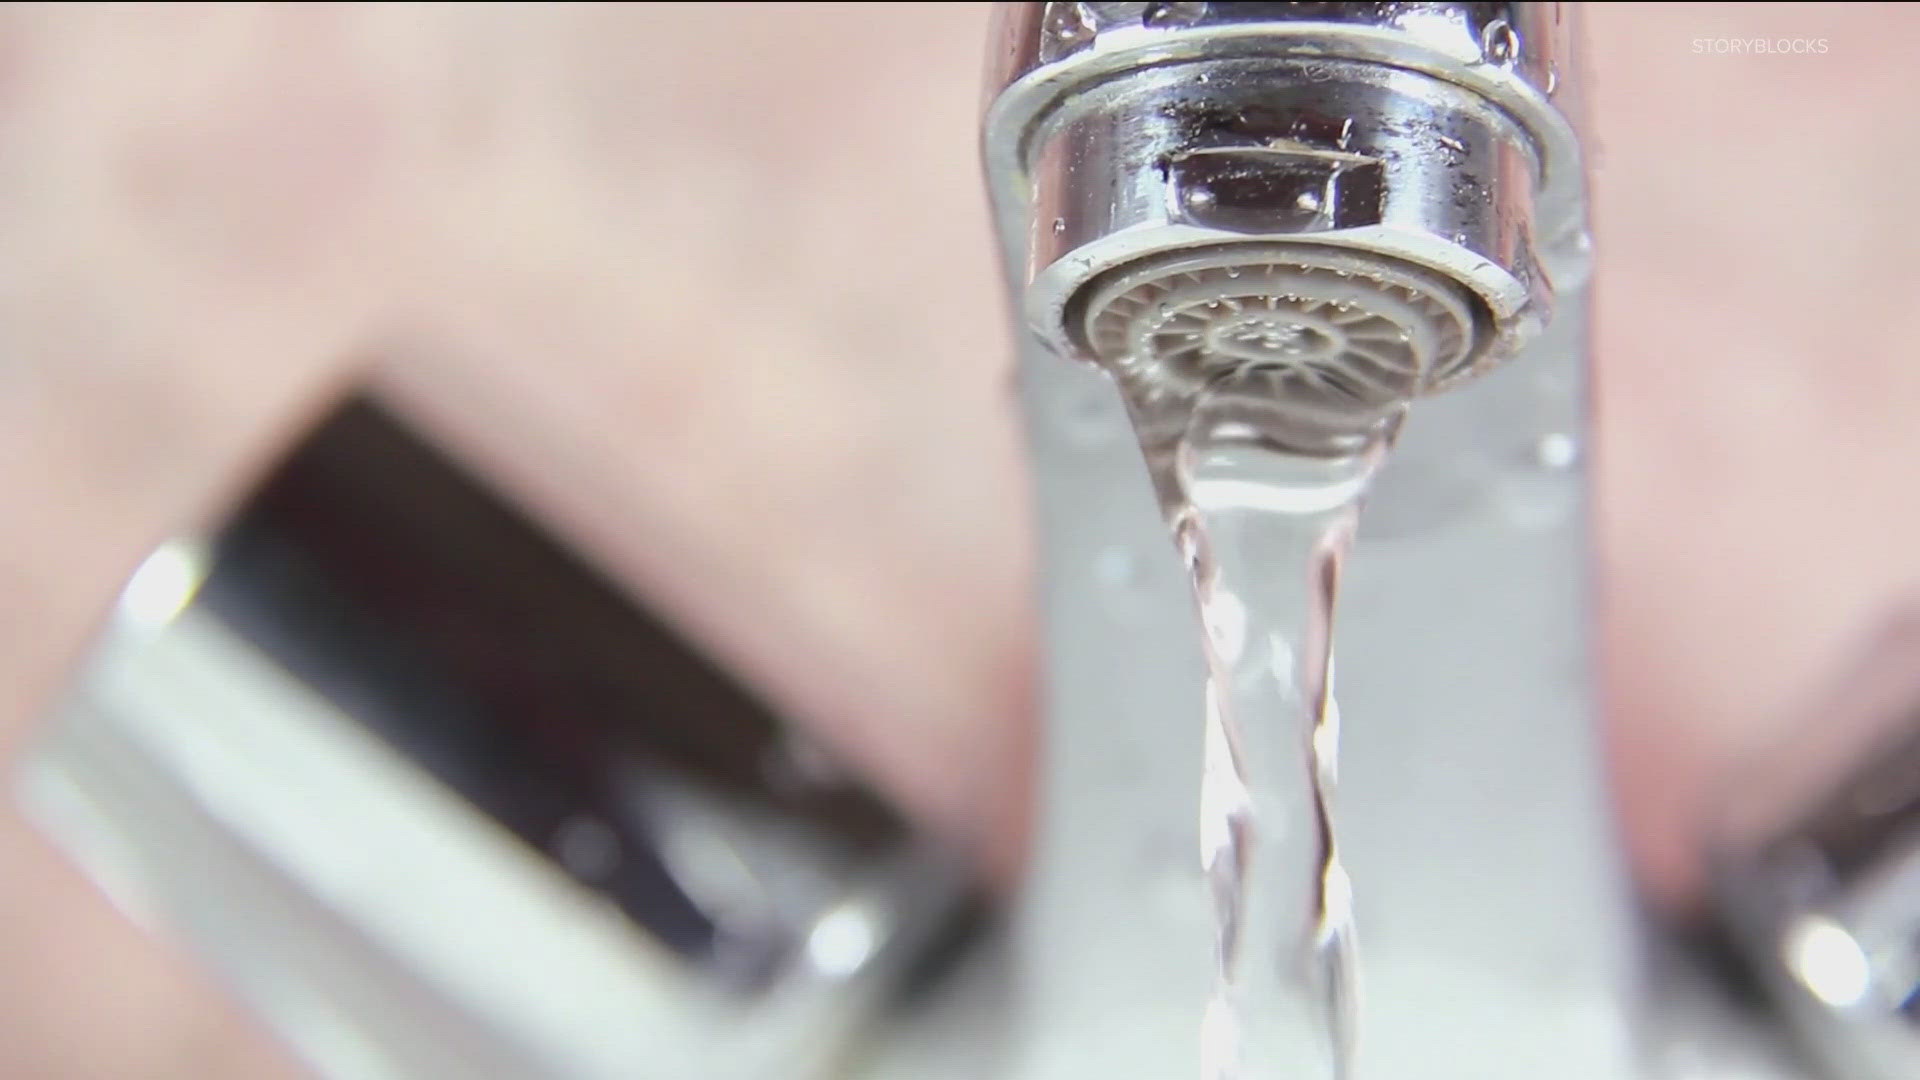 "Just be just keeping an eye on on the water that you're using and turn it off when it's not needed," Fayetteville Utilities Director Tim Nyander said.